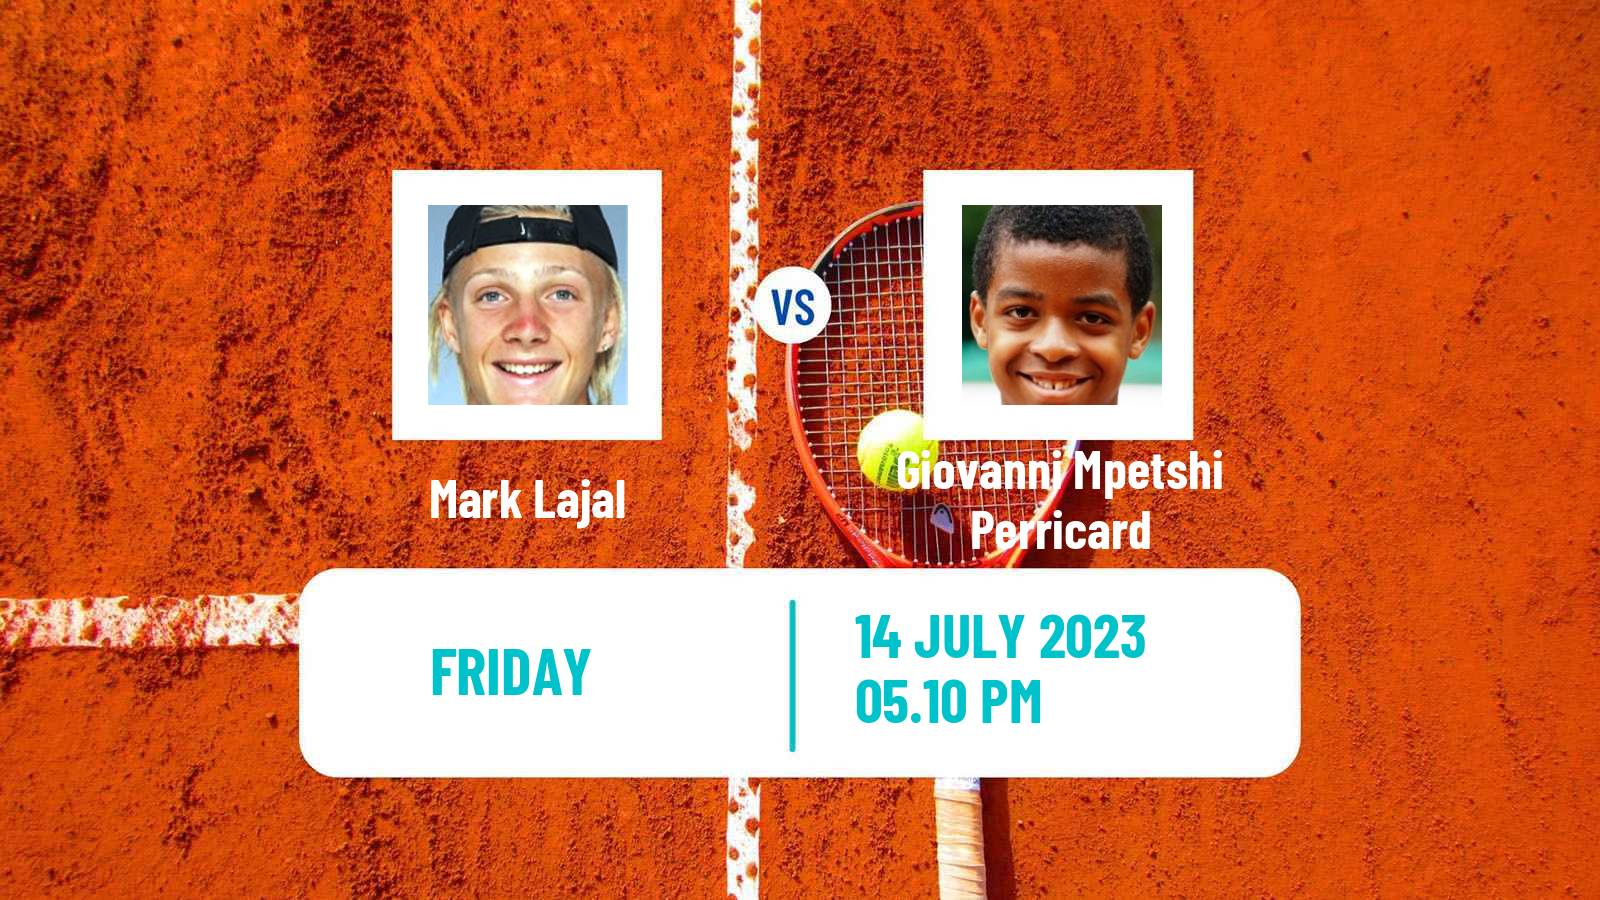 Tennis Chicago Challenger Men Mark Lajal - Giovanni Mpetshi Perricard